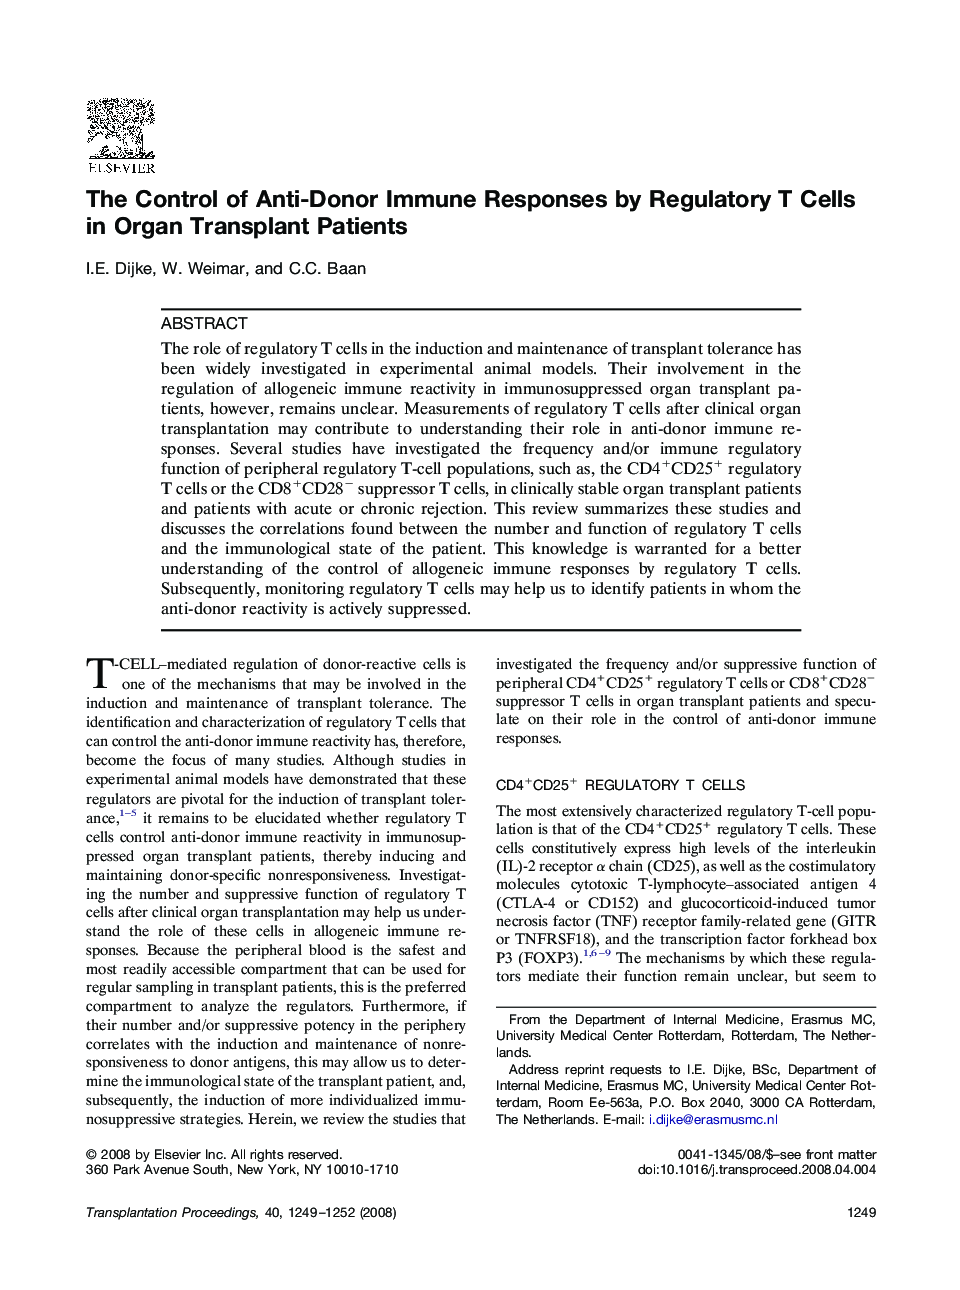 The Control of Anti-Donor Immune Responses by Regulatory T Cells in Organ Transplant Patients